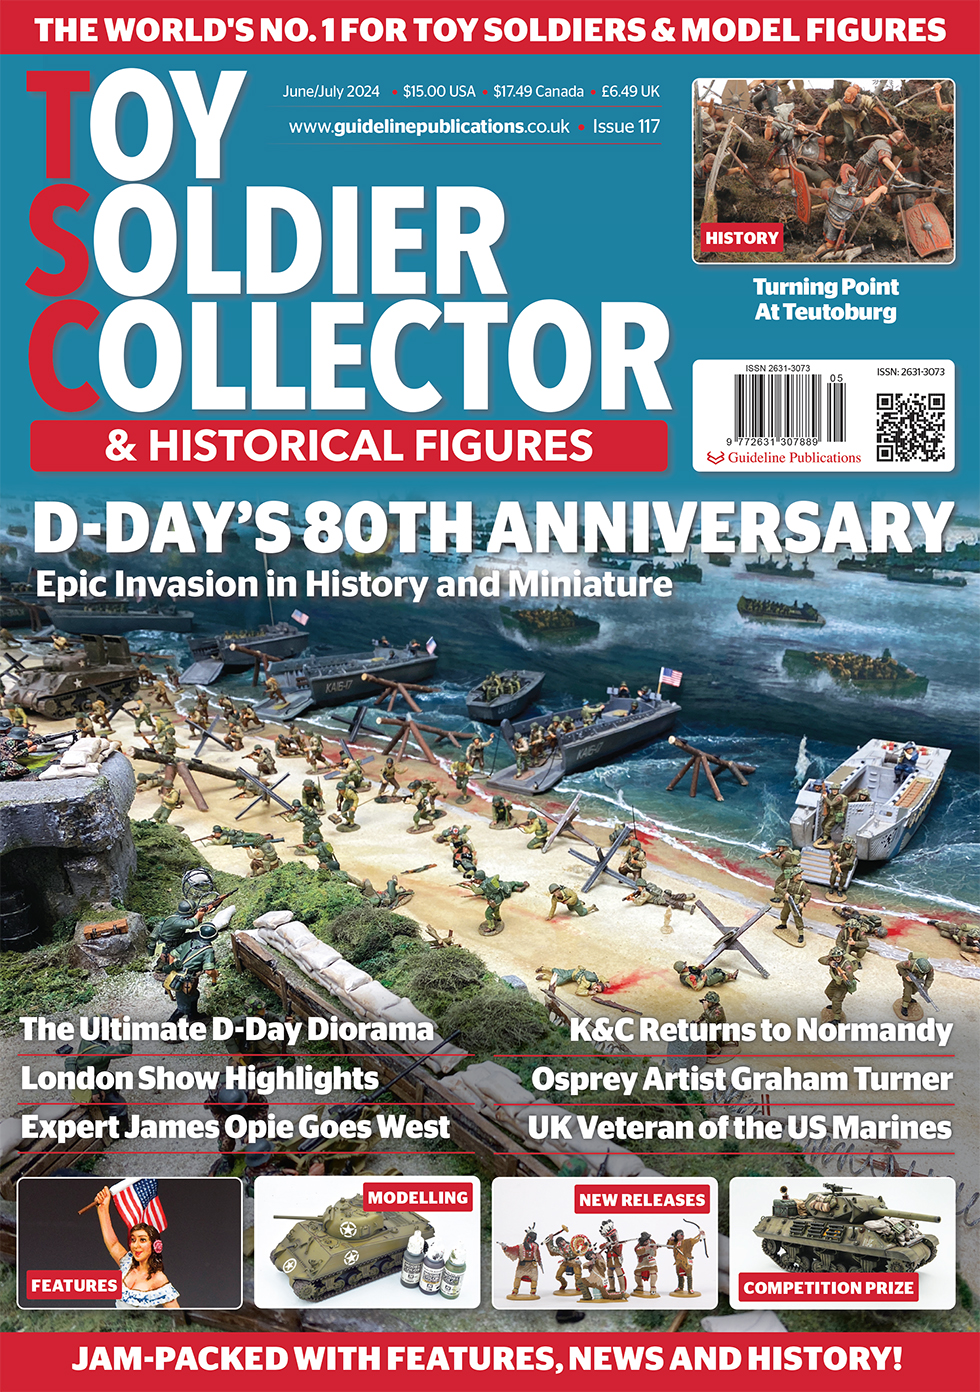 Guideline Publications Ltd Toy Soldier Collector #117 Issue 117 